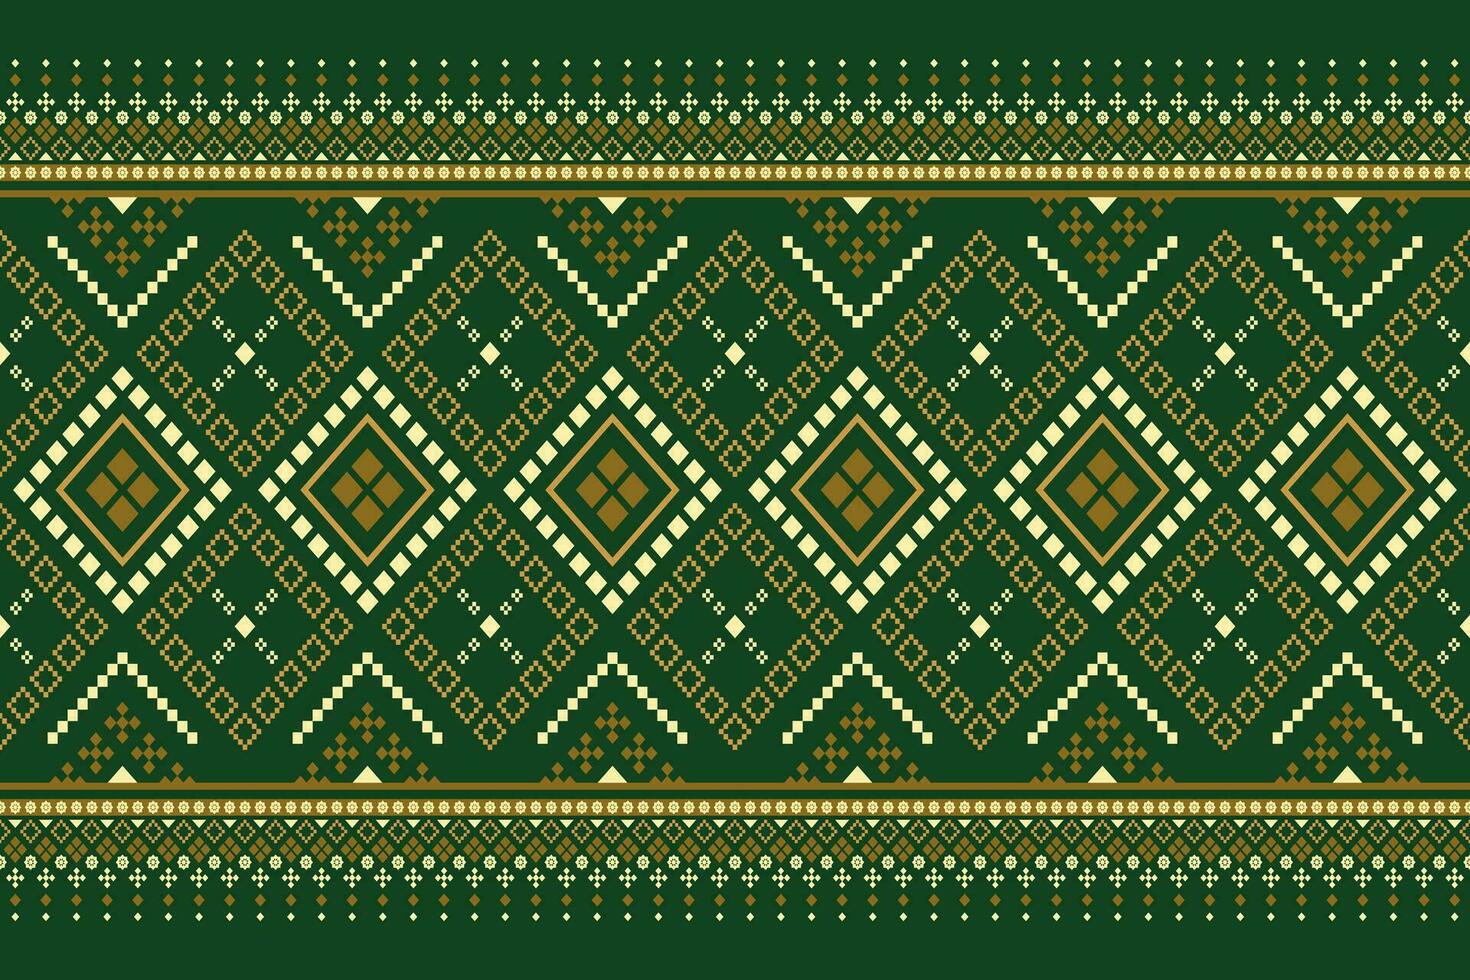 Green Cross stitch colorful geometric traditional ethnic pattern Ikat seamless pattern border abstract design for fabric print cloth dress carpet curtains and sarong Aztec African Indian Indonesian vector